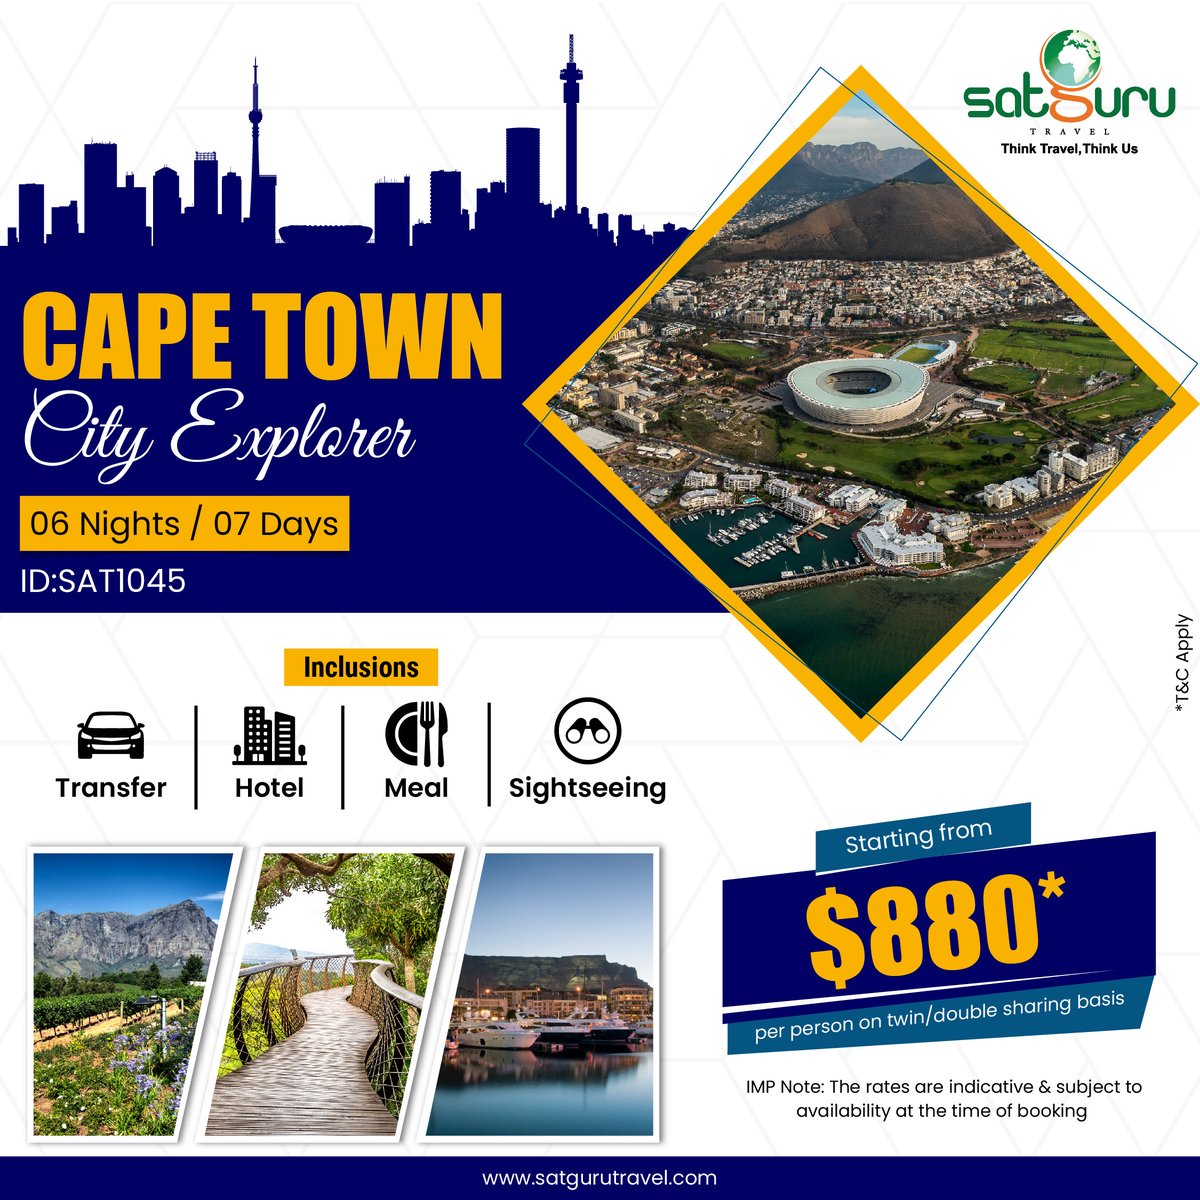 Embark on an unforgettable South African adventure with our exceptional packages! satgurutravel.com/exclusive-offe… . . . . #SouthAfrica #Travel #Adventure #Explore #Safari #holidaypackage #trip #tour #satgurutravel